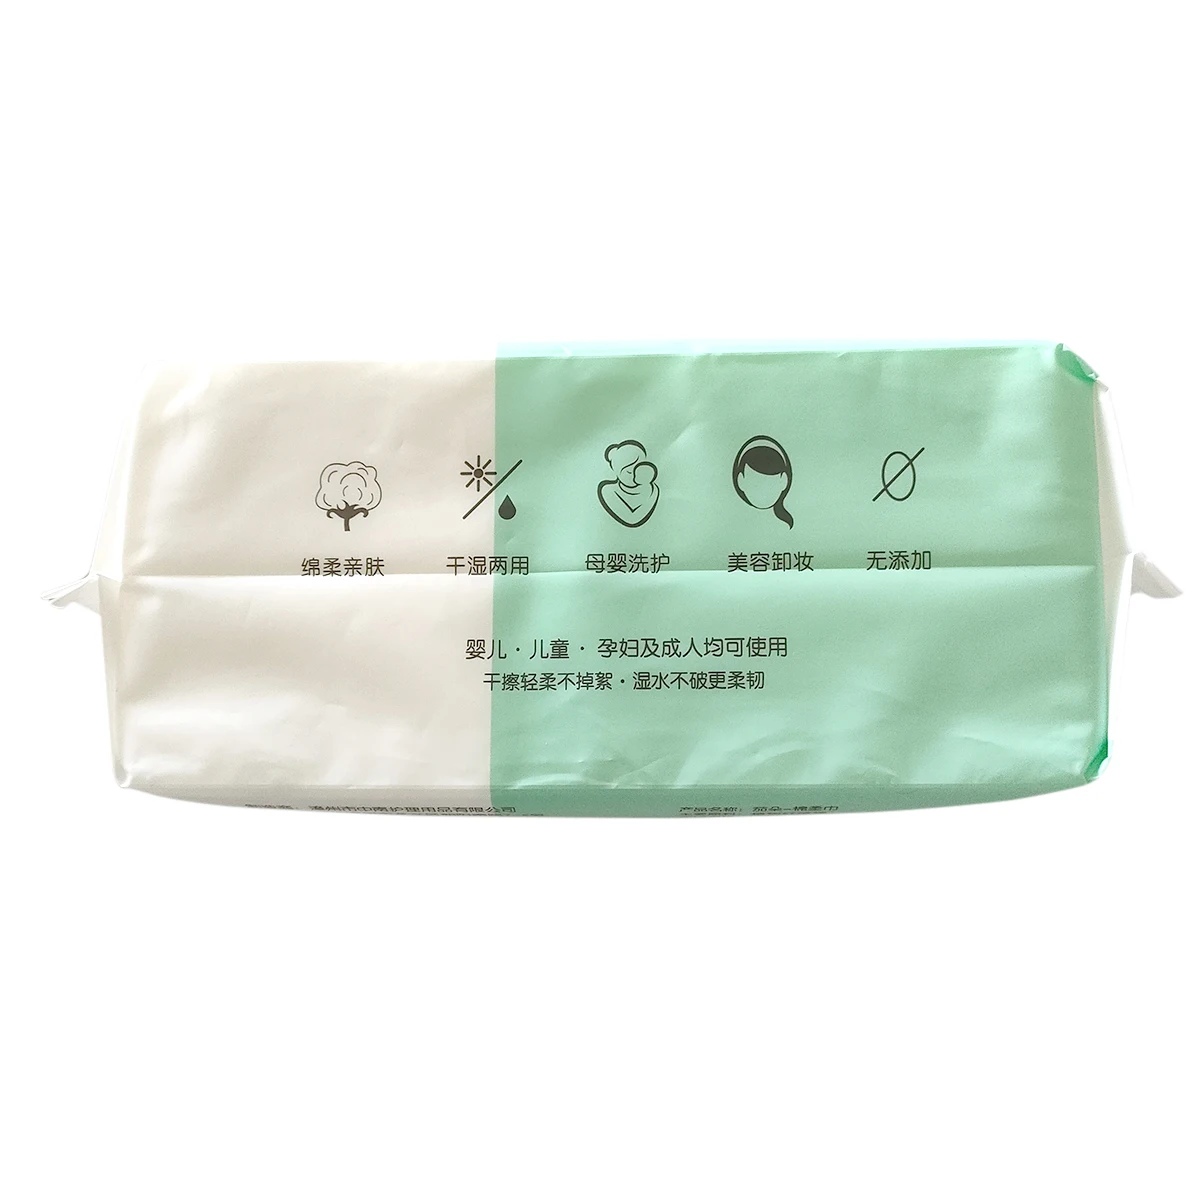 Cheap Factory Price Free Sample Dry Wipes Thicken Pearl Embossed Big Sizes Portable Cotton Tissue for Babies and Adults